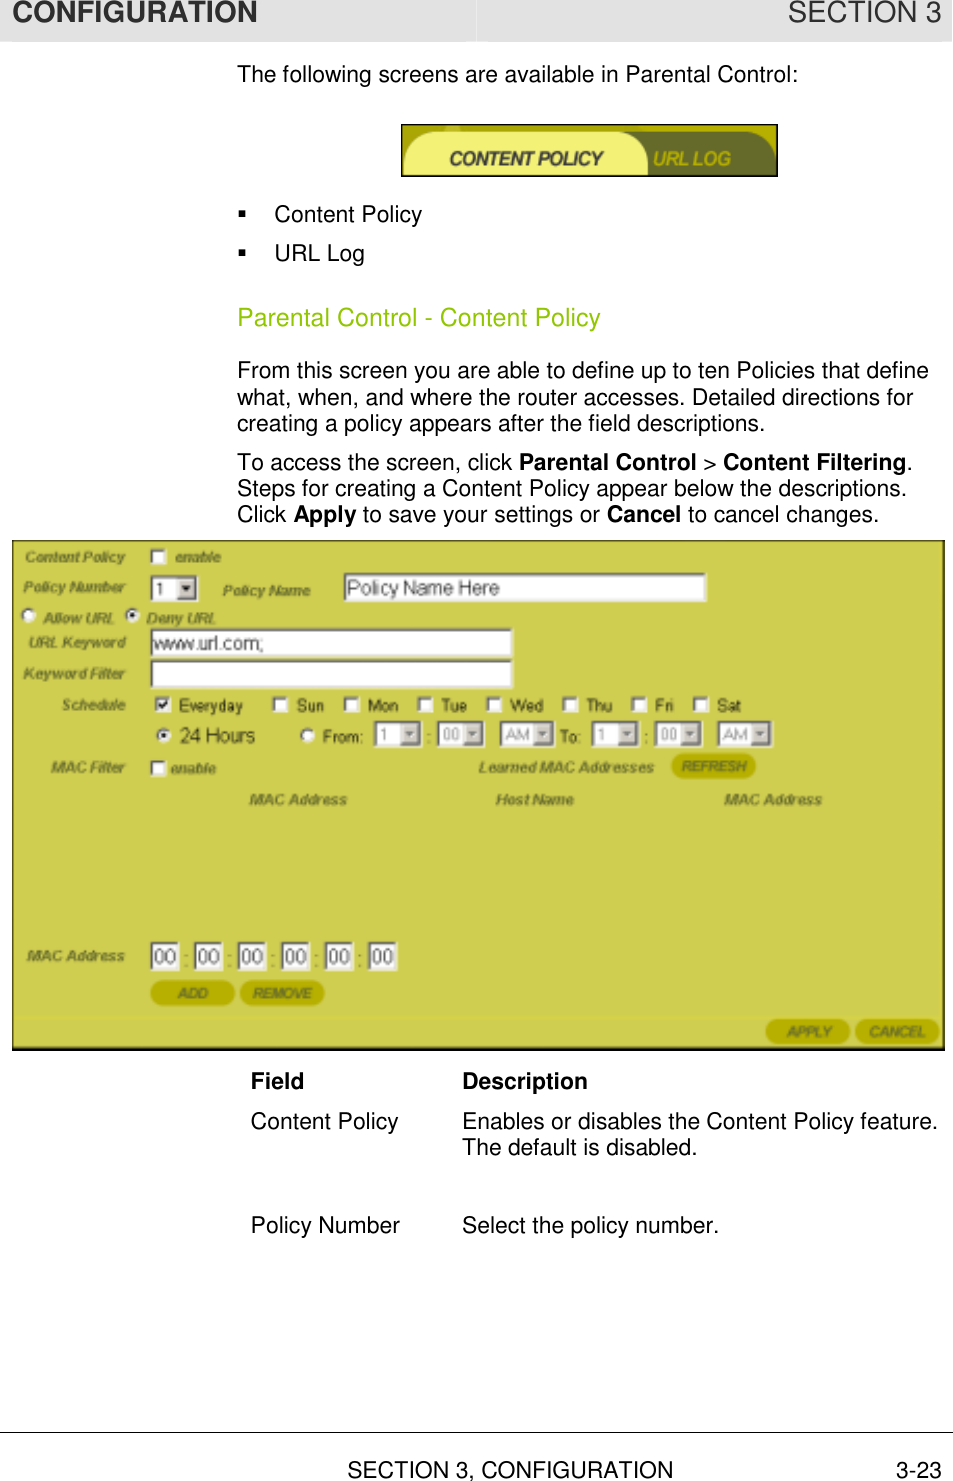 CONFIGURATION SECTION 3   SECTION 3, CONFIGURATION  3-23 The following screens are available in Parental Control:  !  Content Policy !  URL Log Parental Control - Content Policy From this screen you are able to define up to ten Policies that define what, when, and where the router accesses. Detailed directions for creating a policy appears after the field descriptions. To access the screen, click Parental Control &gt; Content Filtering. Steps for creating a Content Policy appear below the descriptions. Click Apply to save your settings or Cancel to cancel changes.  Field Description Content Policy  Enables or disables the Content Policy feature. The default is disabled.  Policy Number  Select the policy number.  